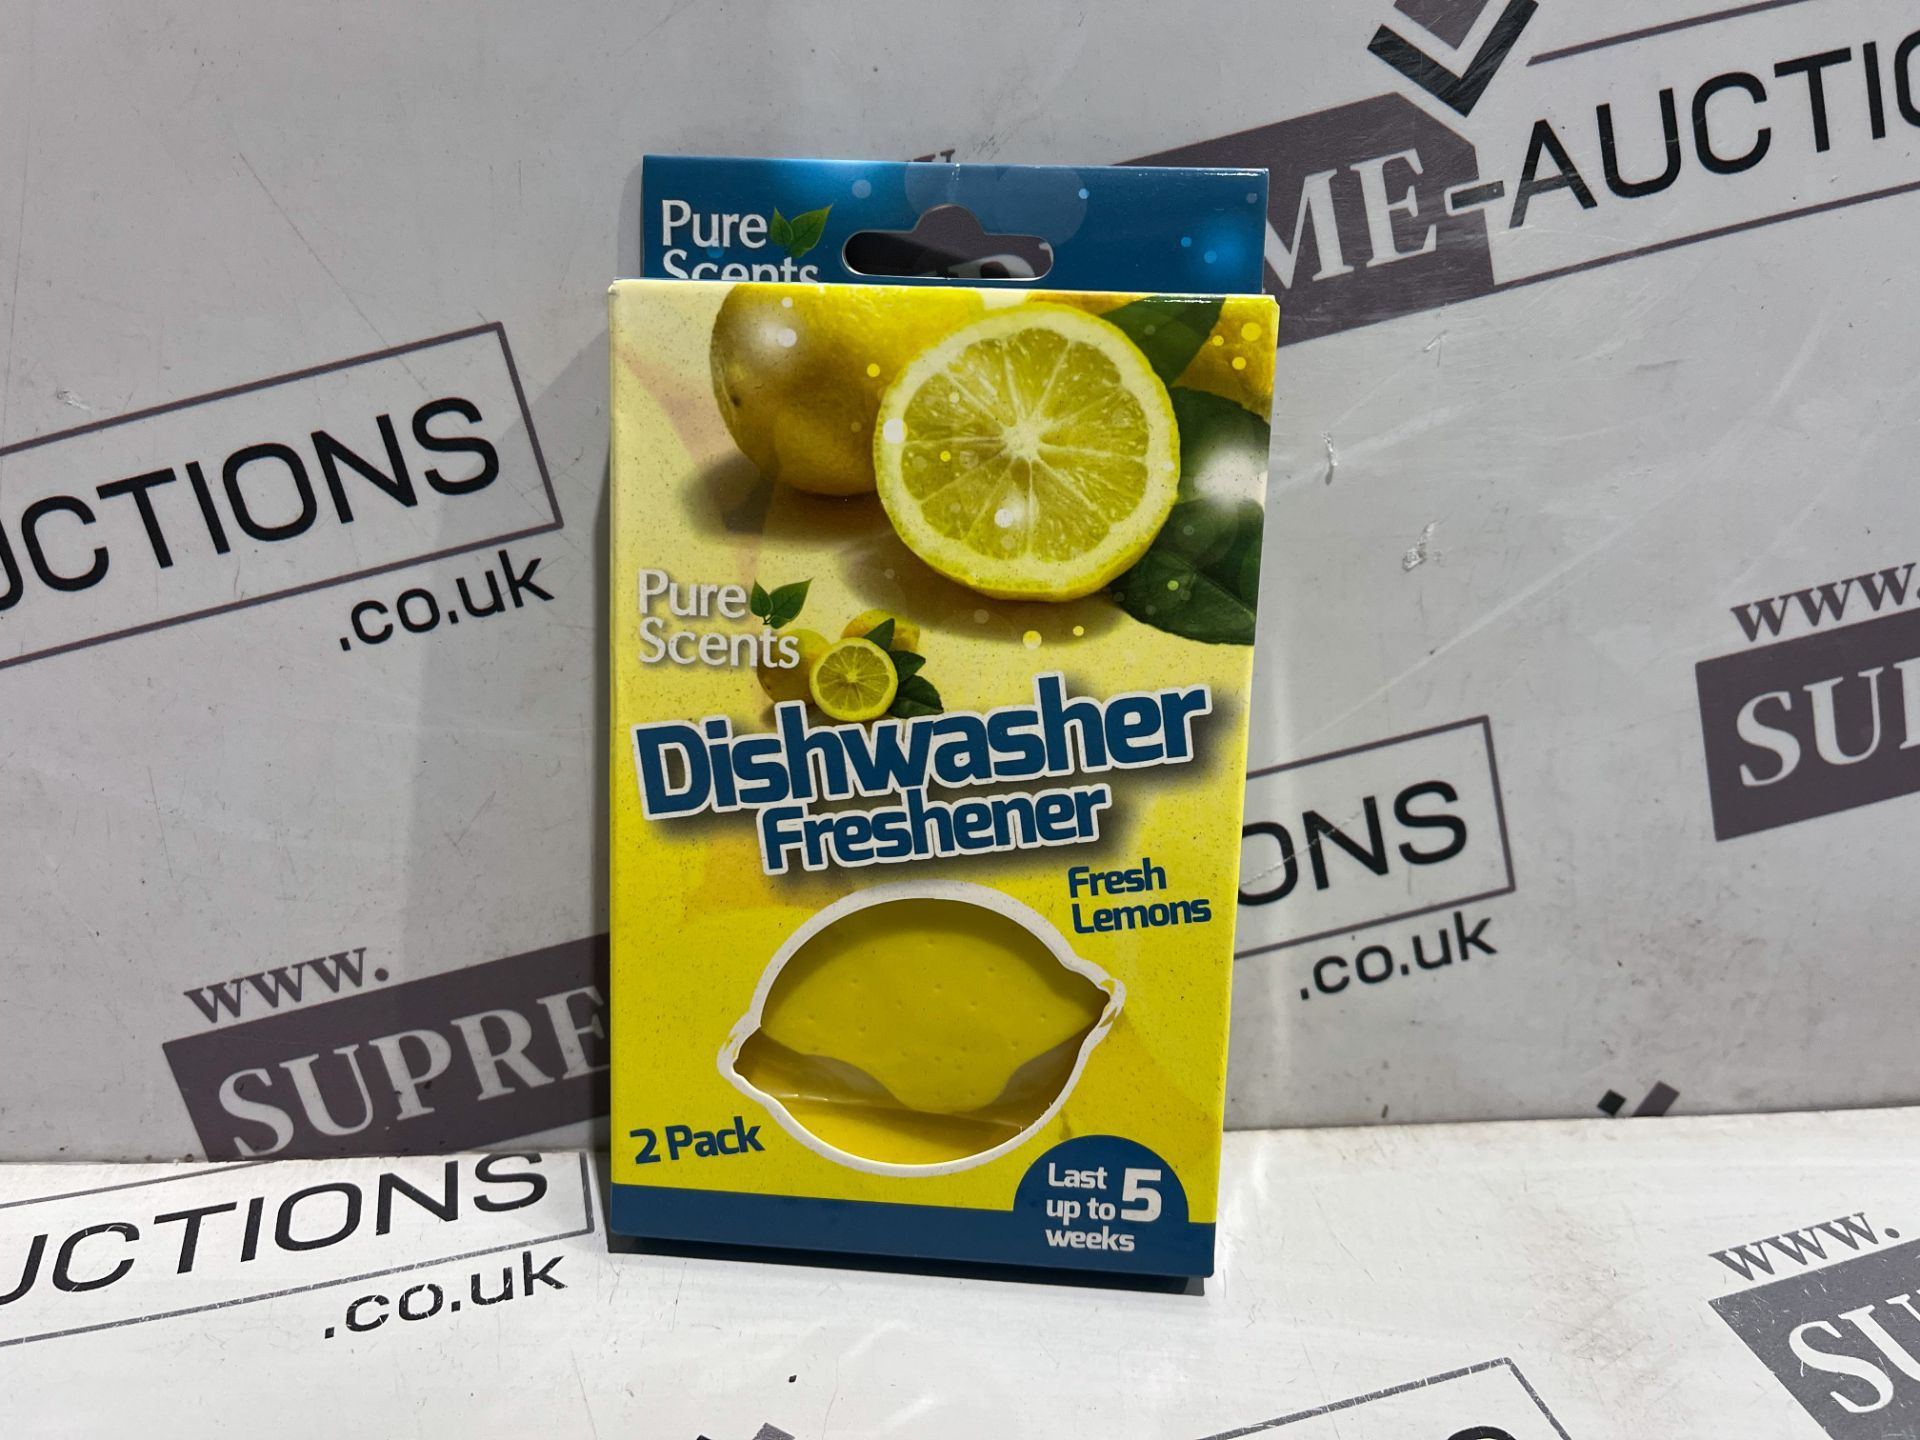 42 X NEW PACKS OF 2 PURE SCENTS DISH WASHER FRESHNERS. FRESH LEMONS. LAST UP TO 5 WEEKS. (ROW12)